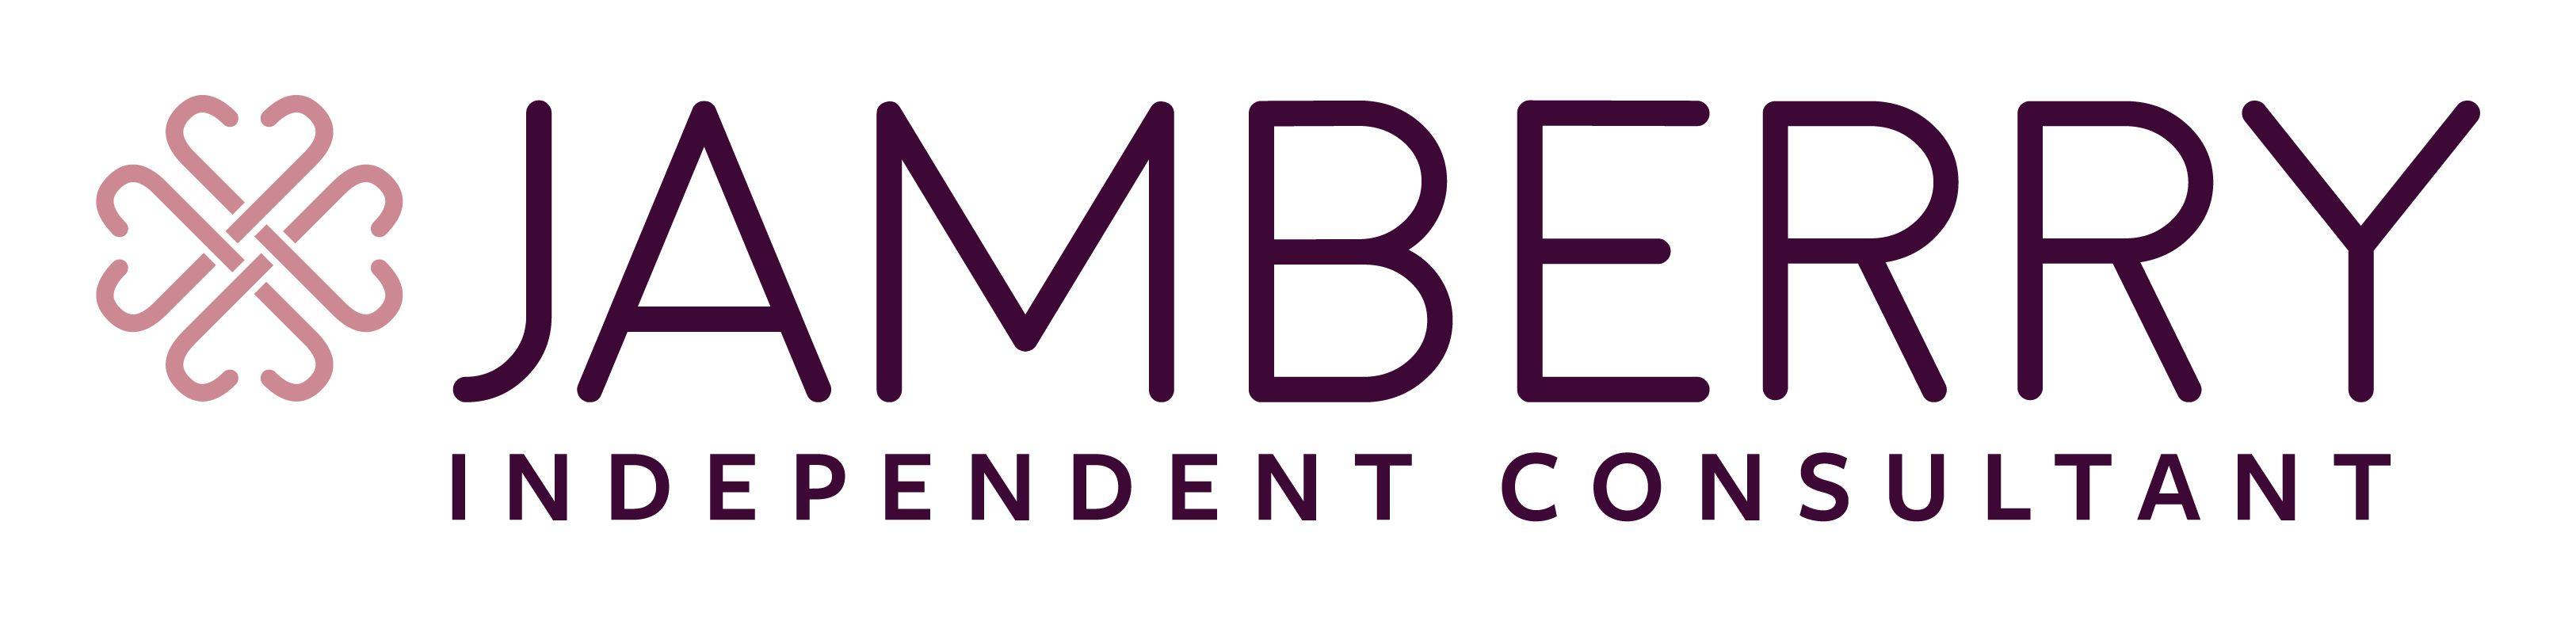 Jamberry Independent Consultant Logo - Current (as of July 2017) Jamberry Independent Consultant Logo for ...